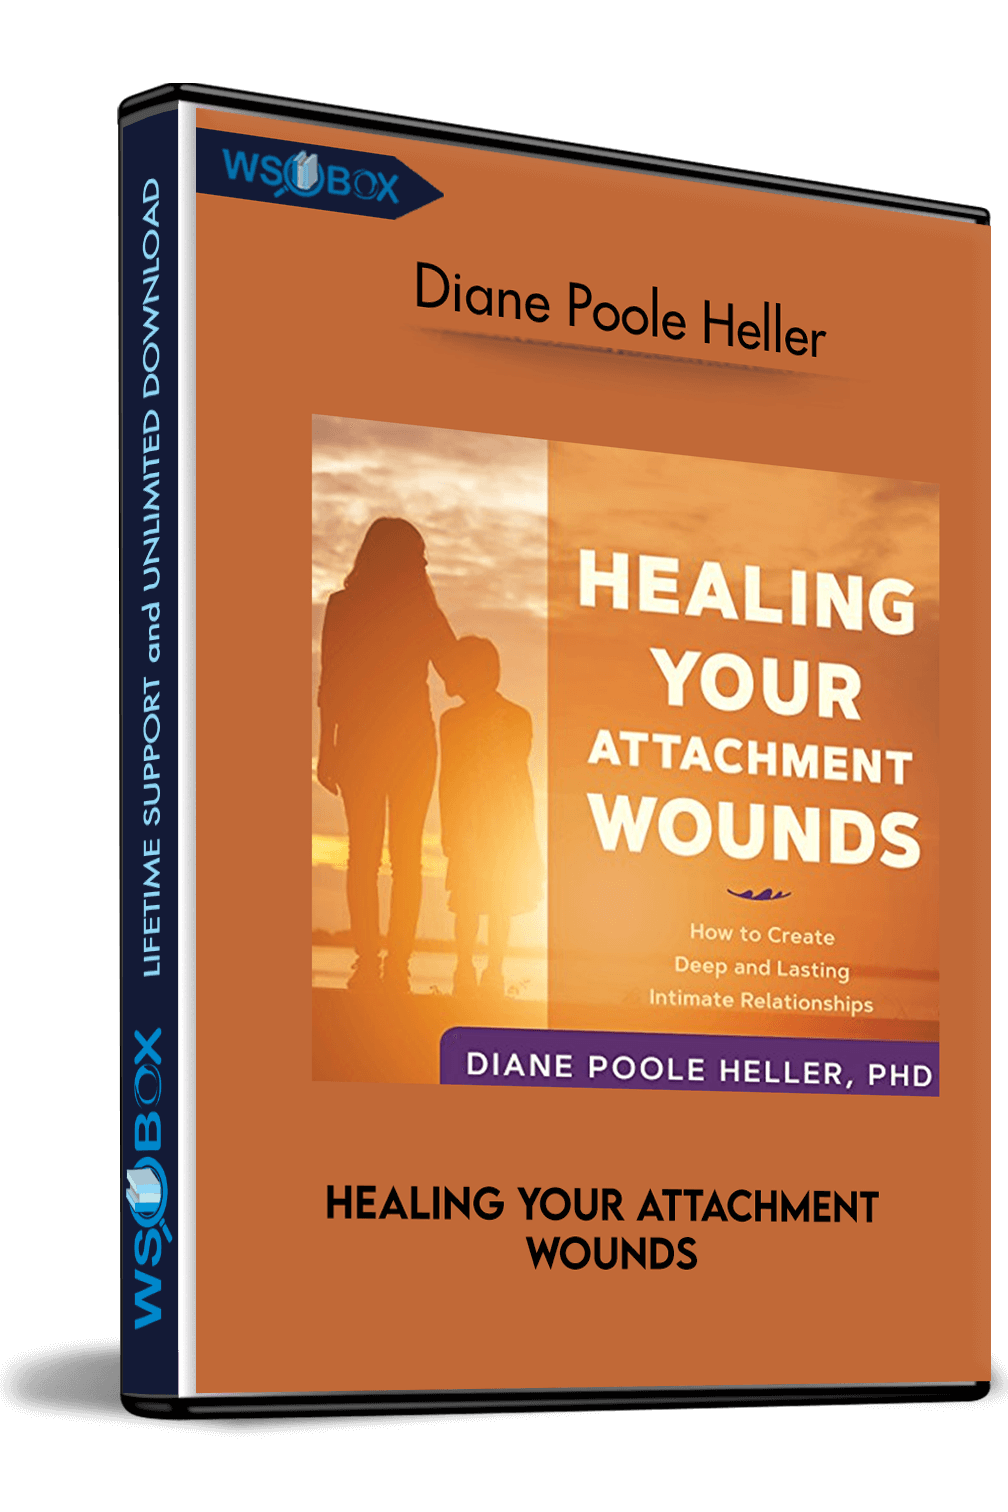 healing-your-attachment-wounds-diane-poole-heller